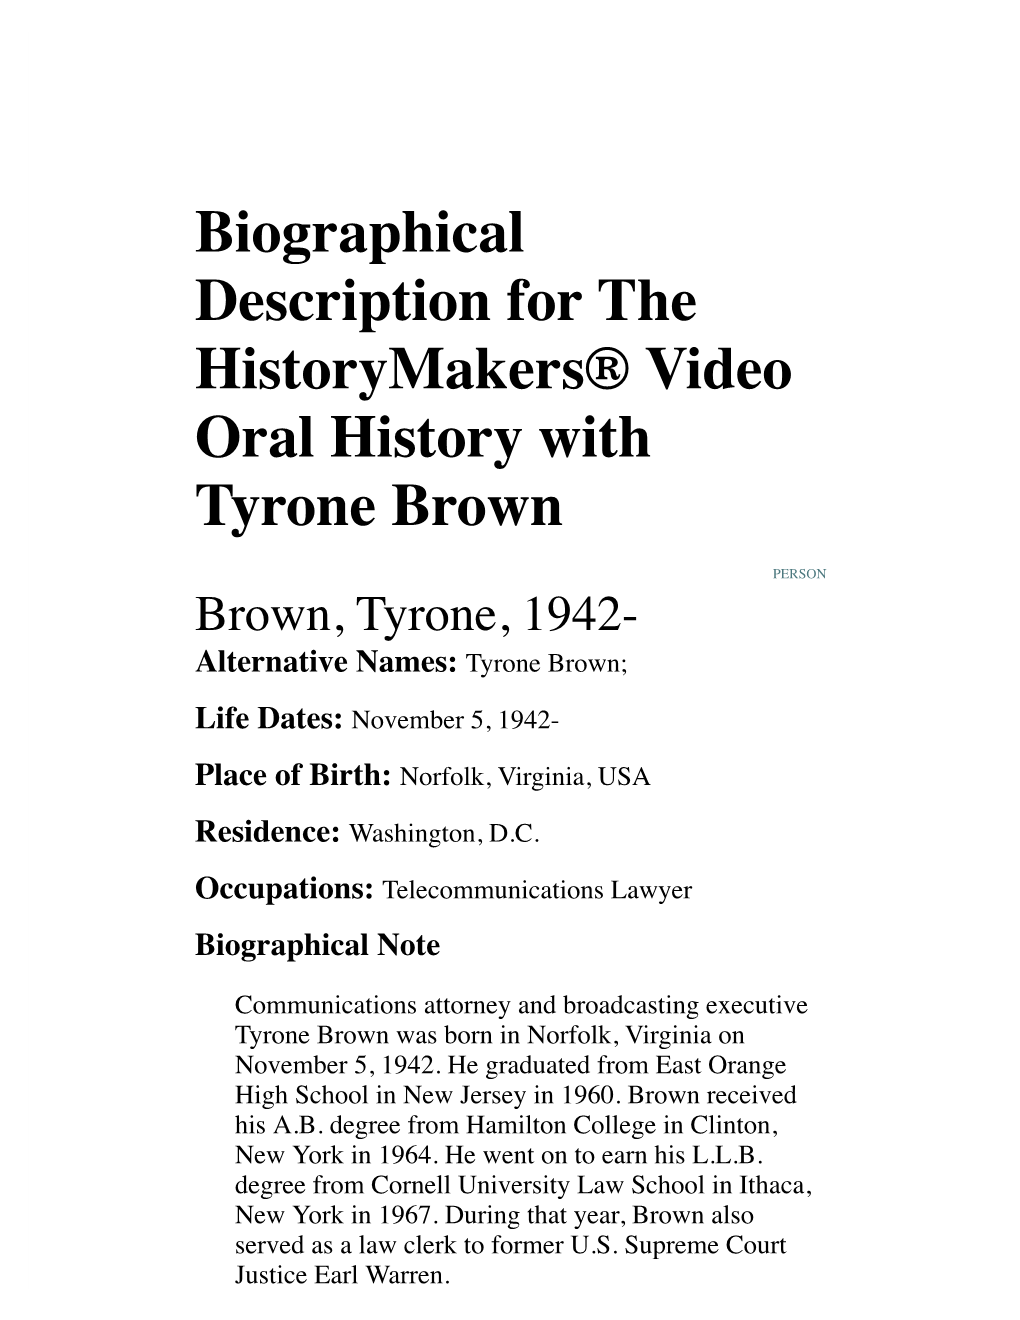 Biographical Description for the Historymakers® Video Oral History with Tyrone Brown